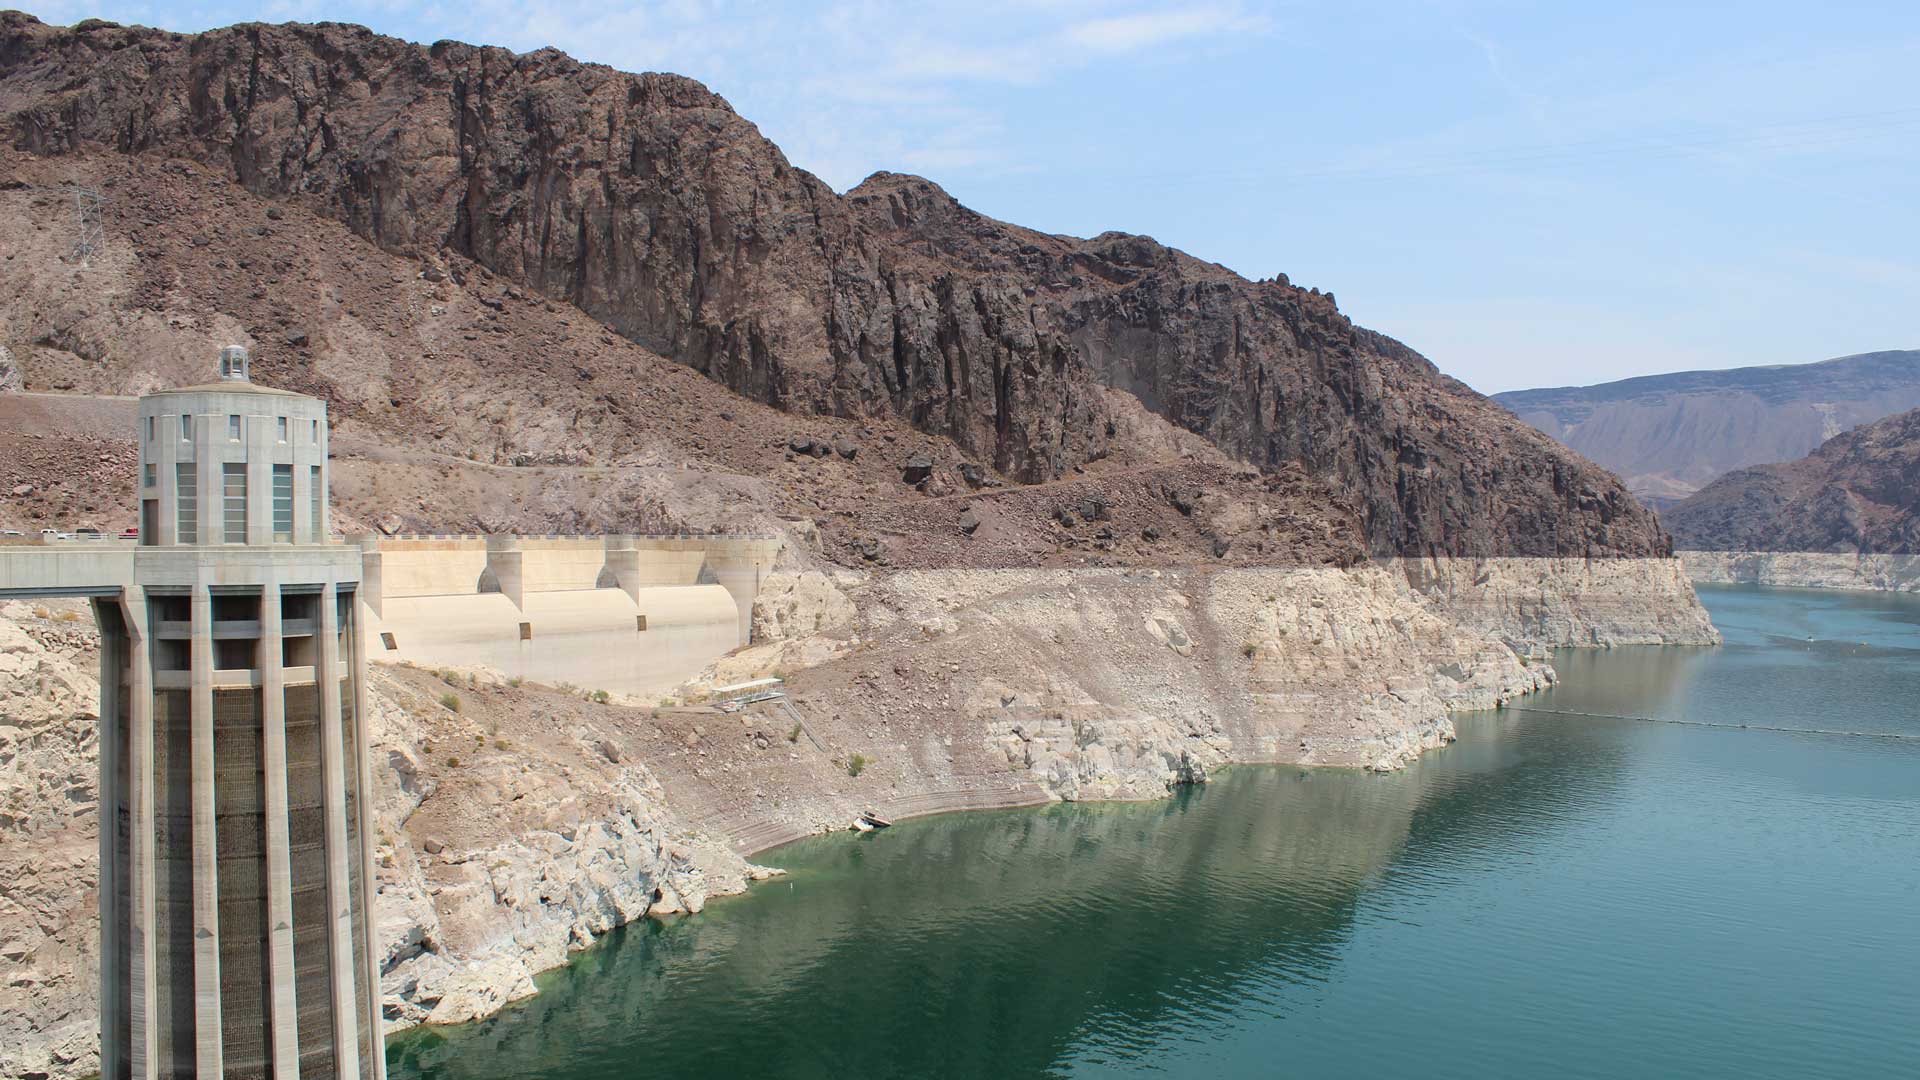 Lake Mead, the nation's largest reservoir, is projected to decline as 2022 progresses, triggering responses from both state and federal officials.